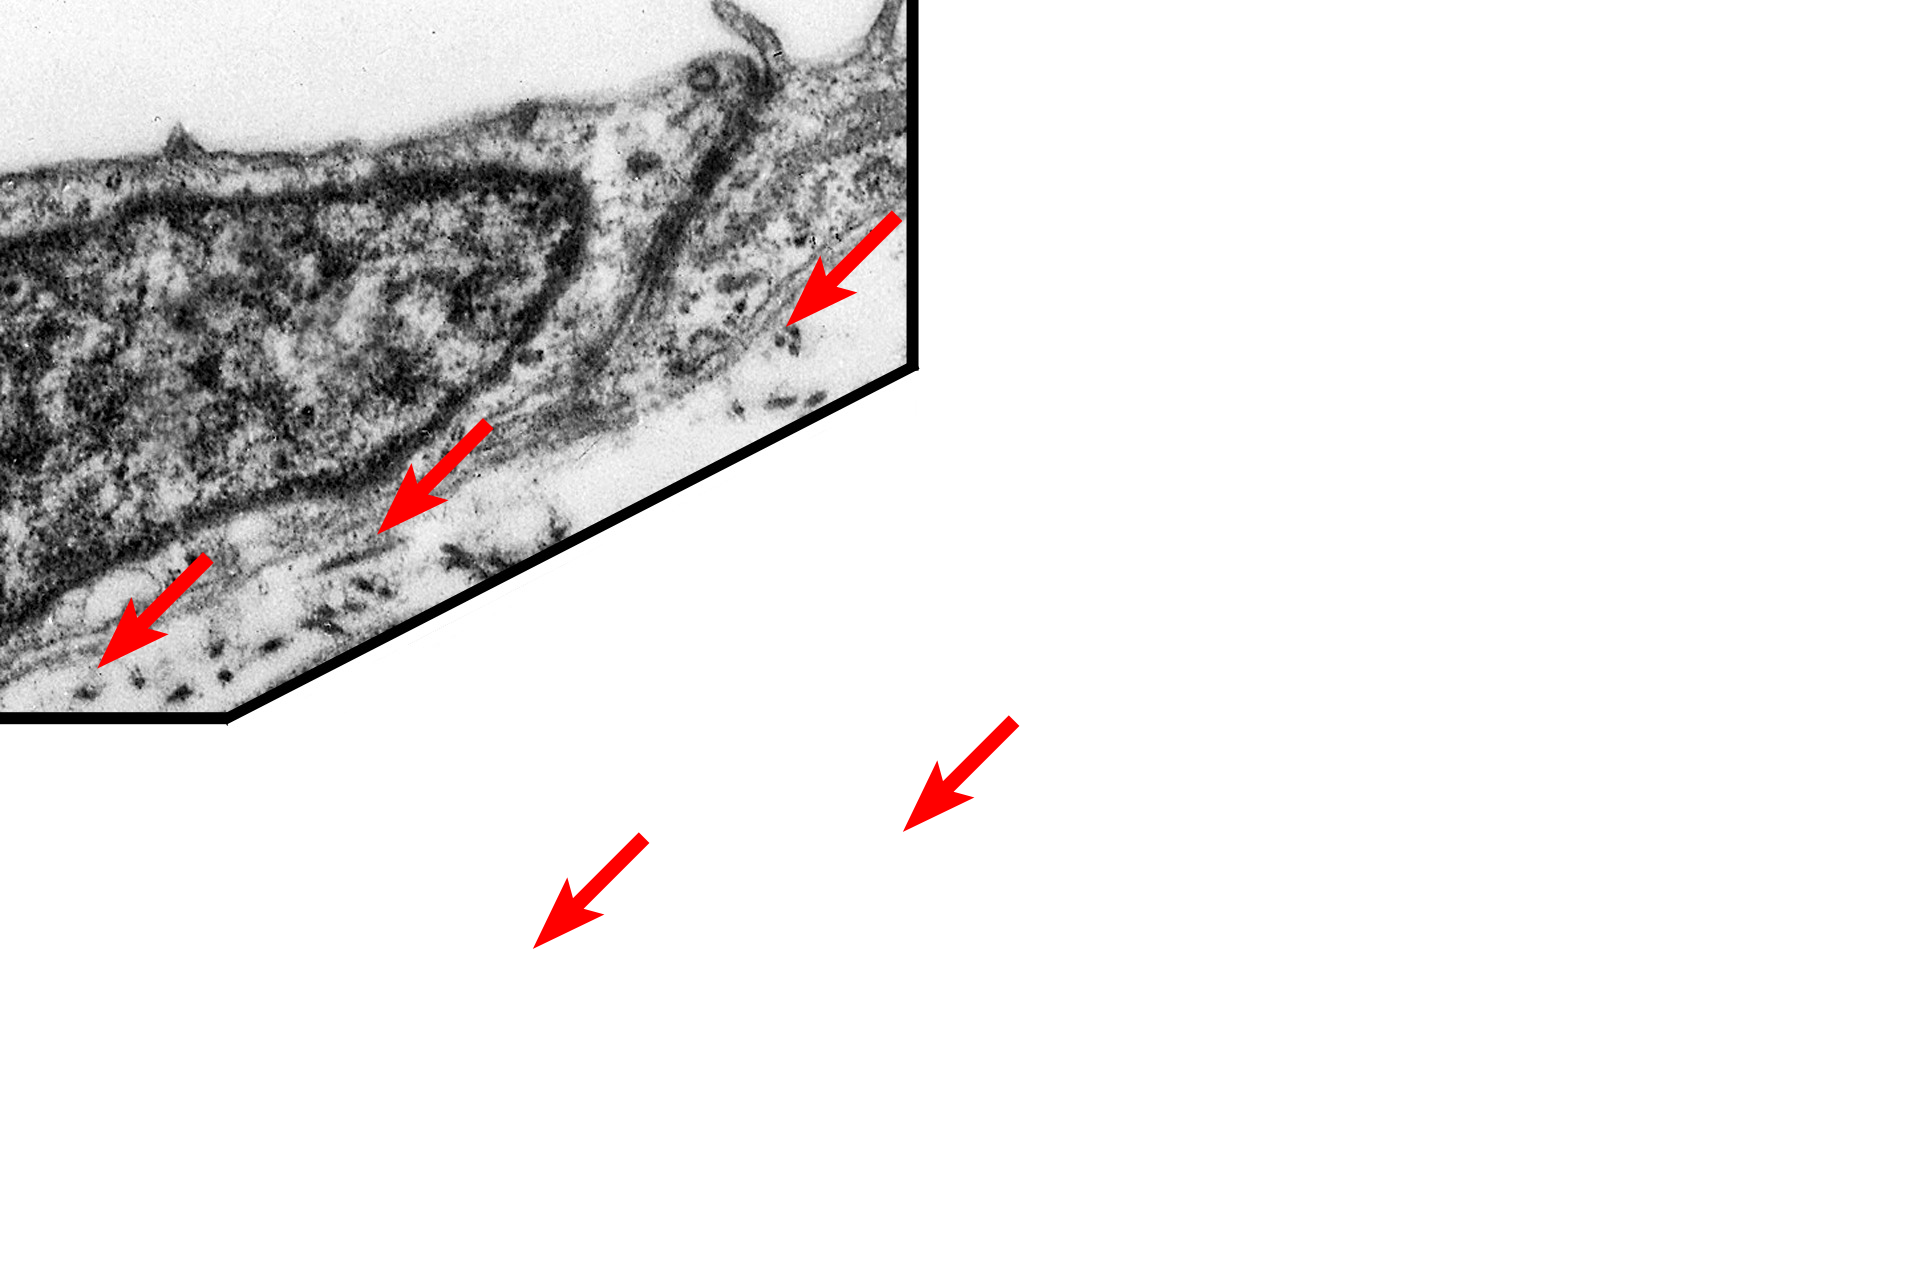 Reticular lamina <p>All epithelia rest on a basement membrane, which consists of two components, the basal lamina, secreted by epithelial cells, and a reticular lamina, secreted by fibroblasts in the underlying connective tissue.  The basal lamina is, in turn, subdivided into lamina lucida and lamina densa.  Serosa  15,000x</p>
